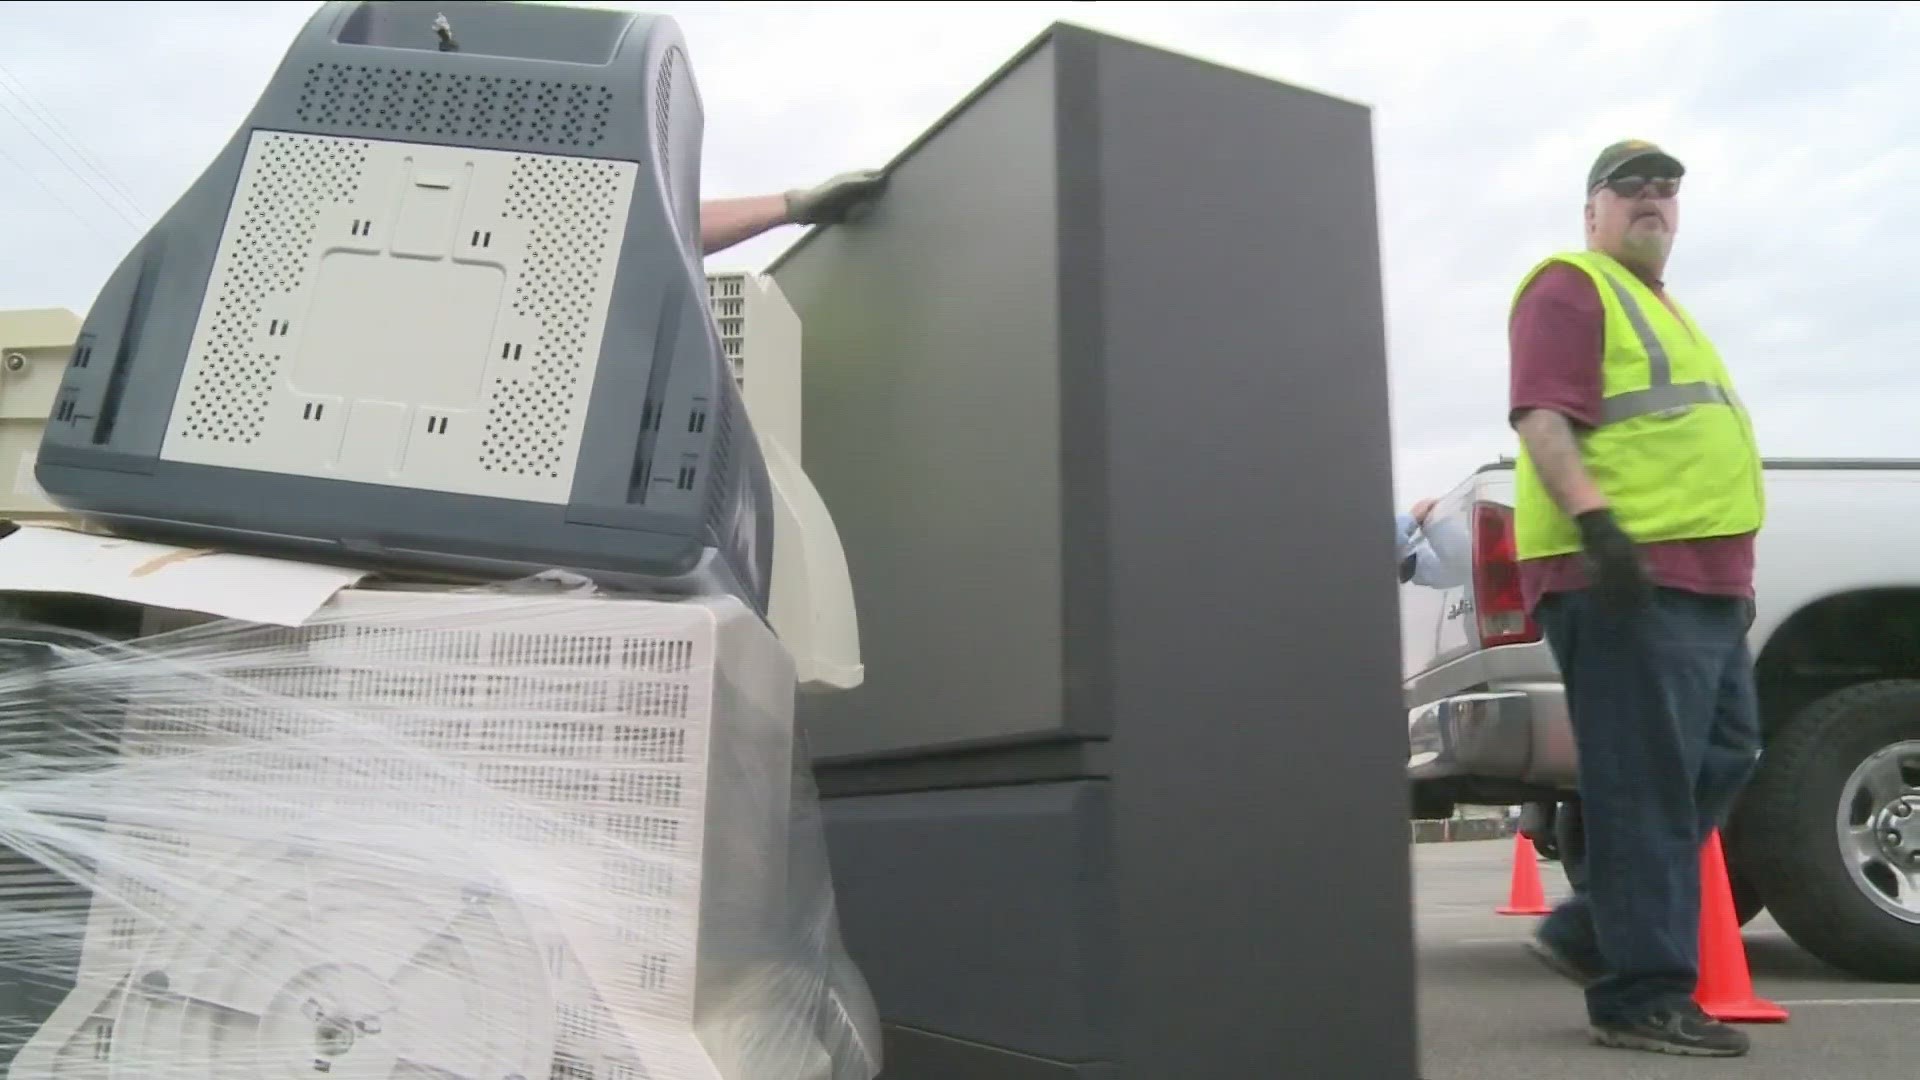 The future of electronic recycling